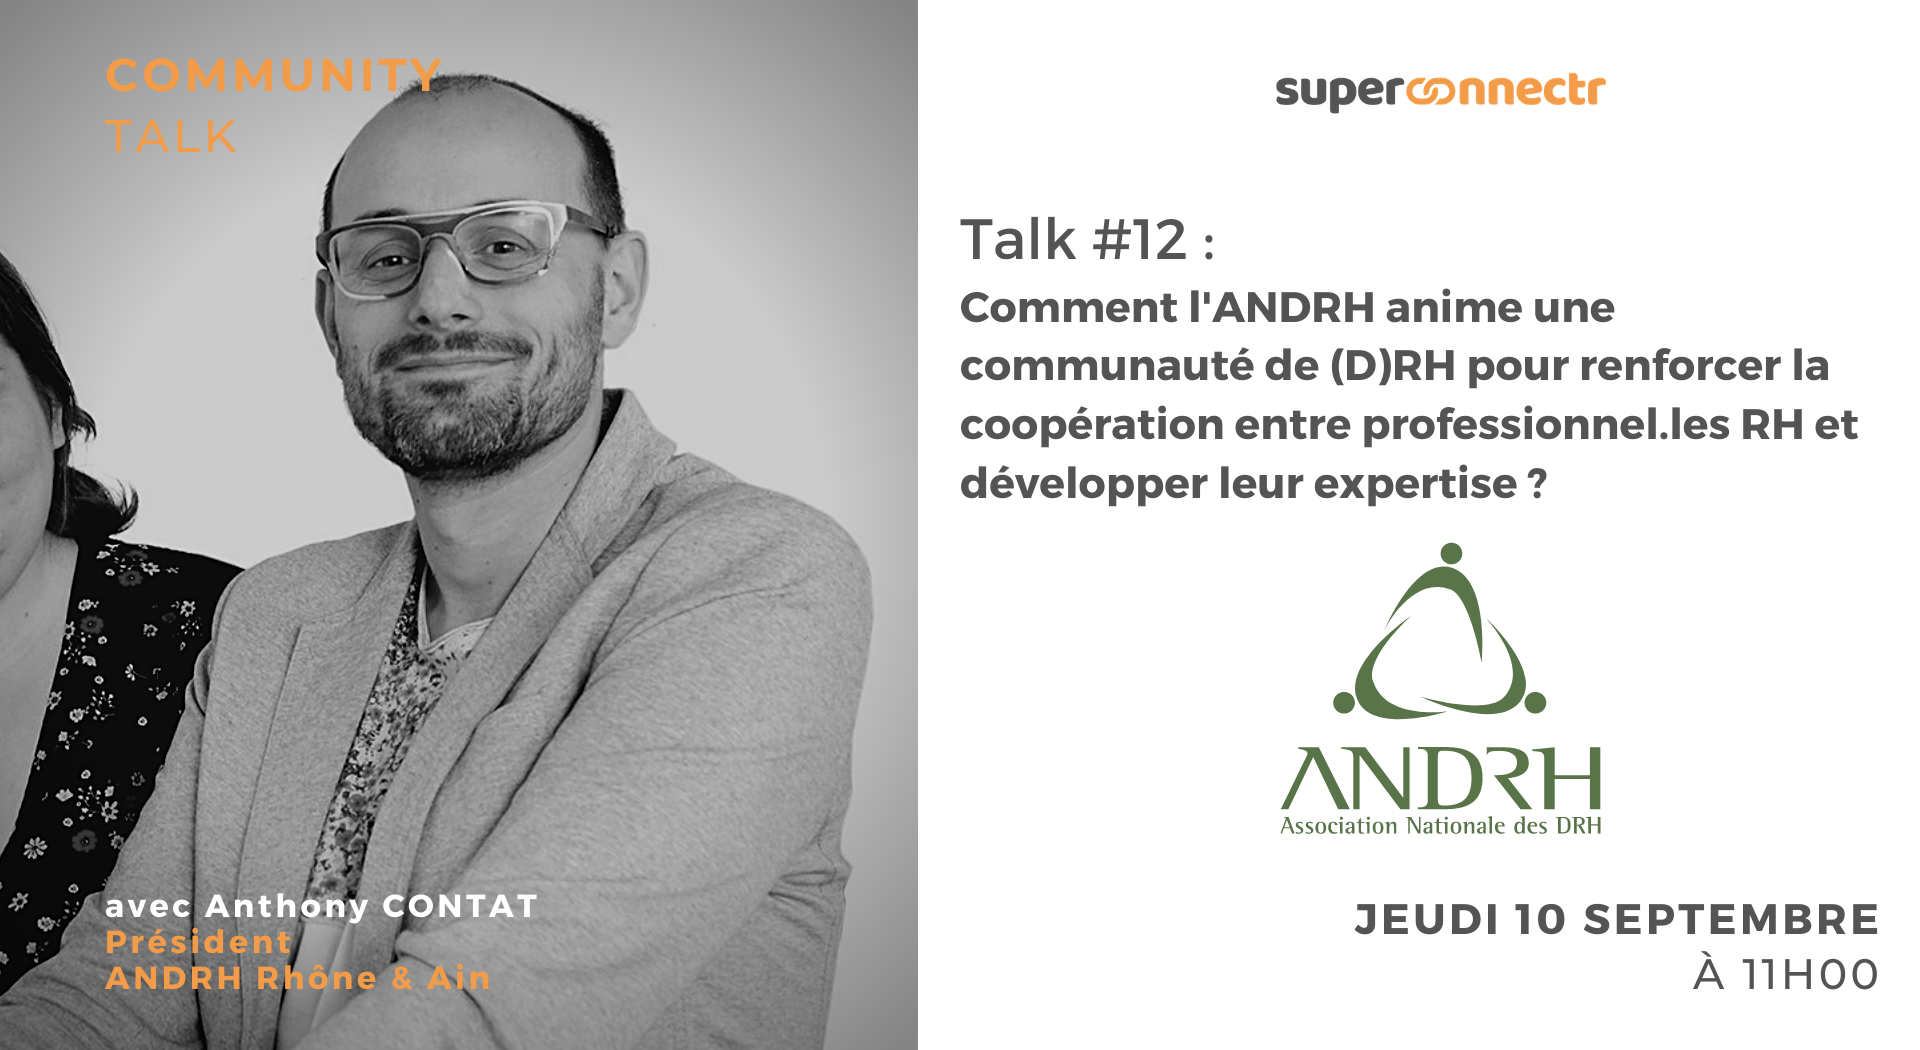 Community Talk by SuperConnectr - Meeting the ANDRH community